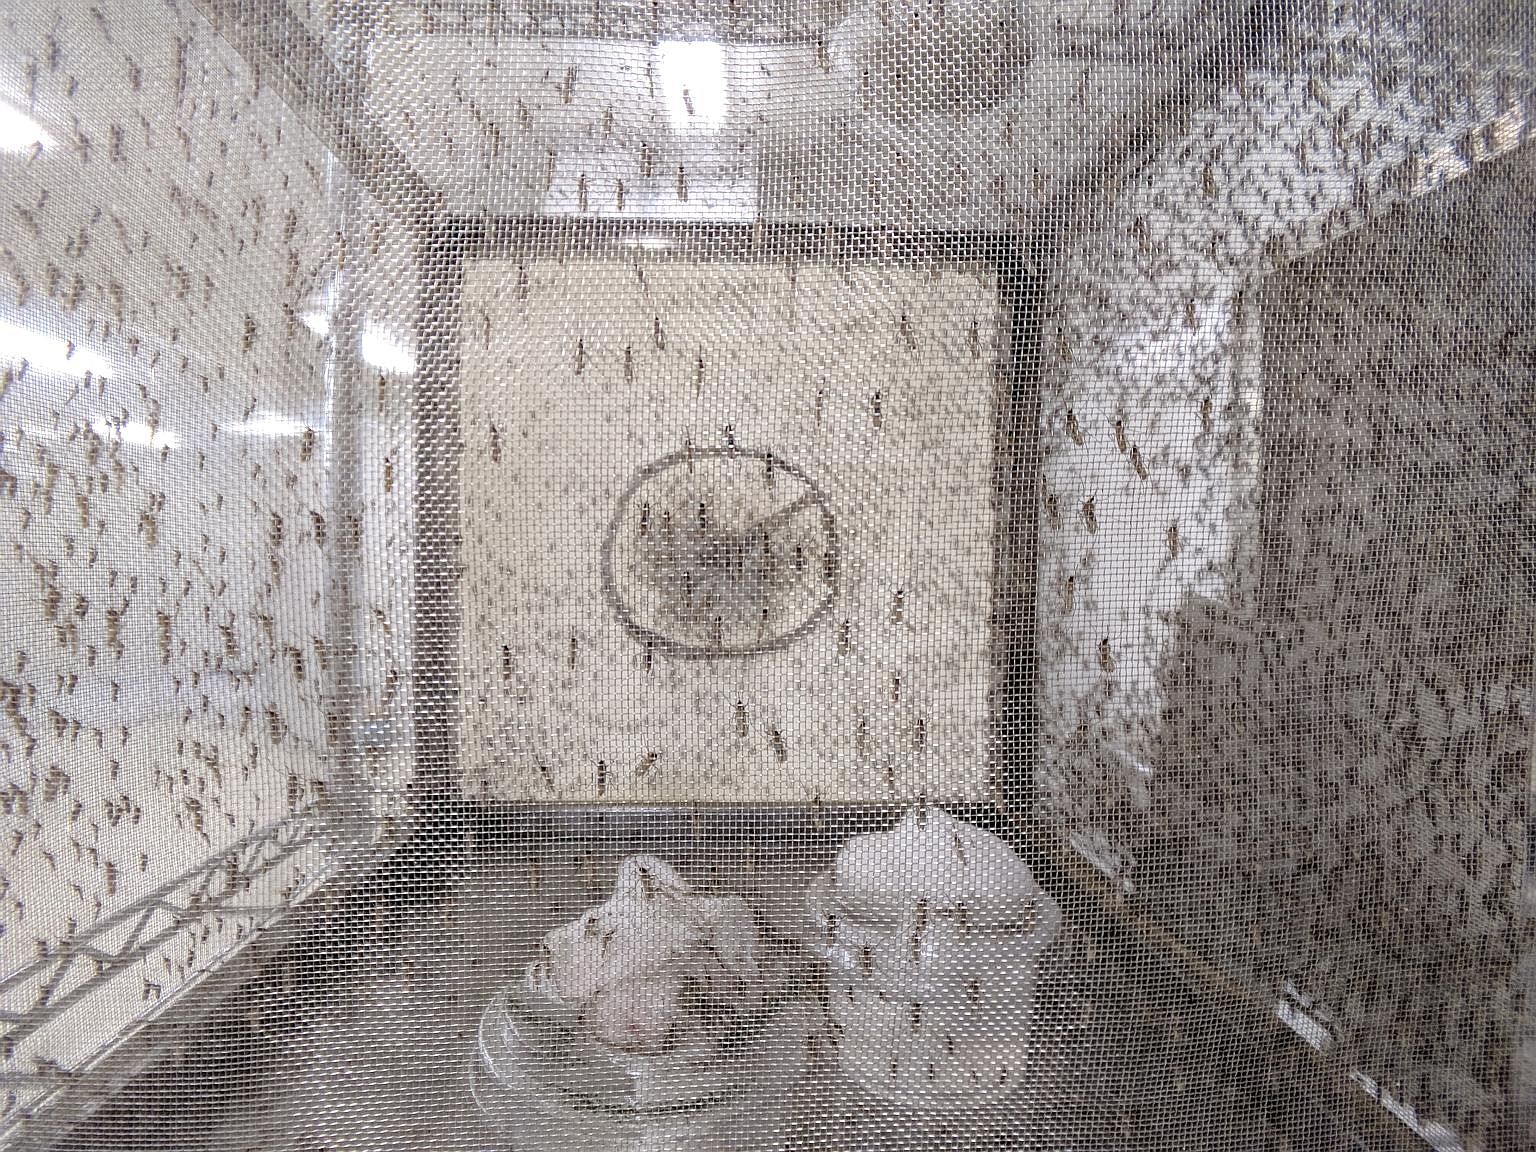 Wolbachia-infected adult females living in mesh cages are fed animal blood via a hotplate. The eggs that they lay are collected. Top: Adult male mosquitoes being freed. The lab's latest innovation involves putting the mosquitoes into cold storage for